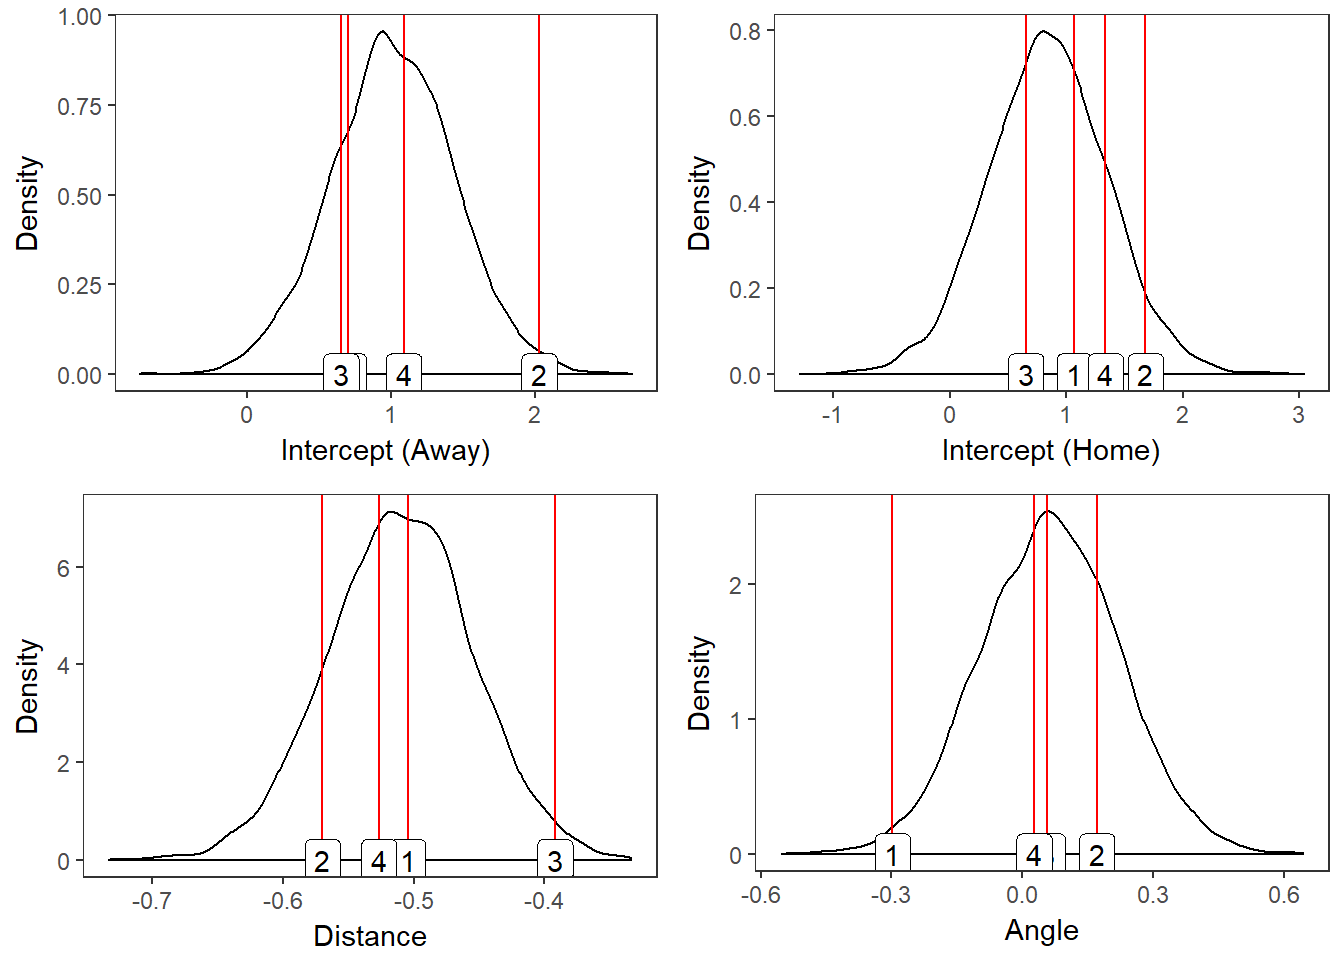 Population Distribution with Four Player Effects